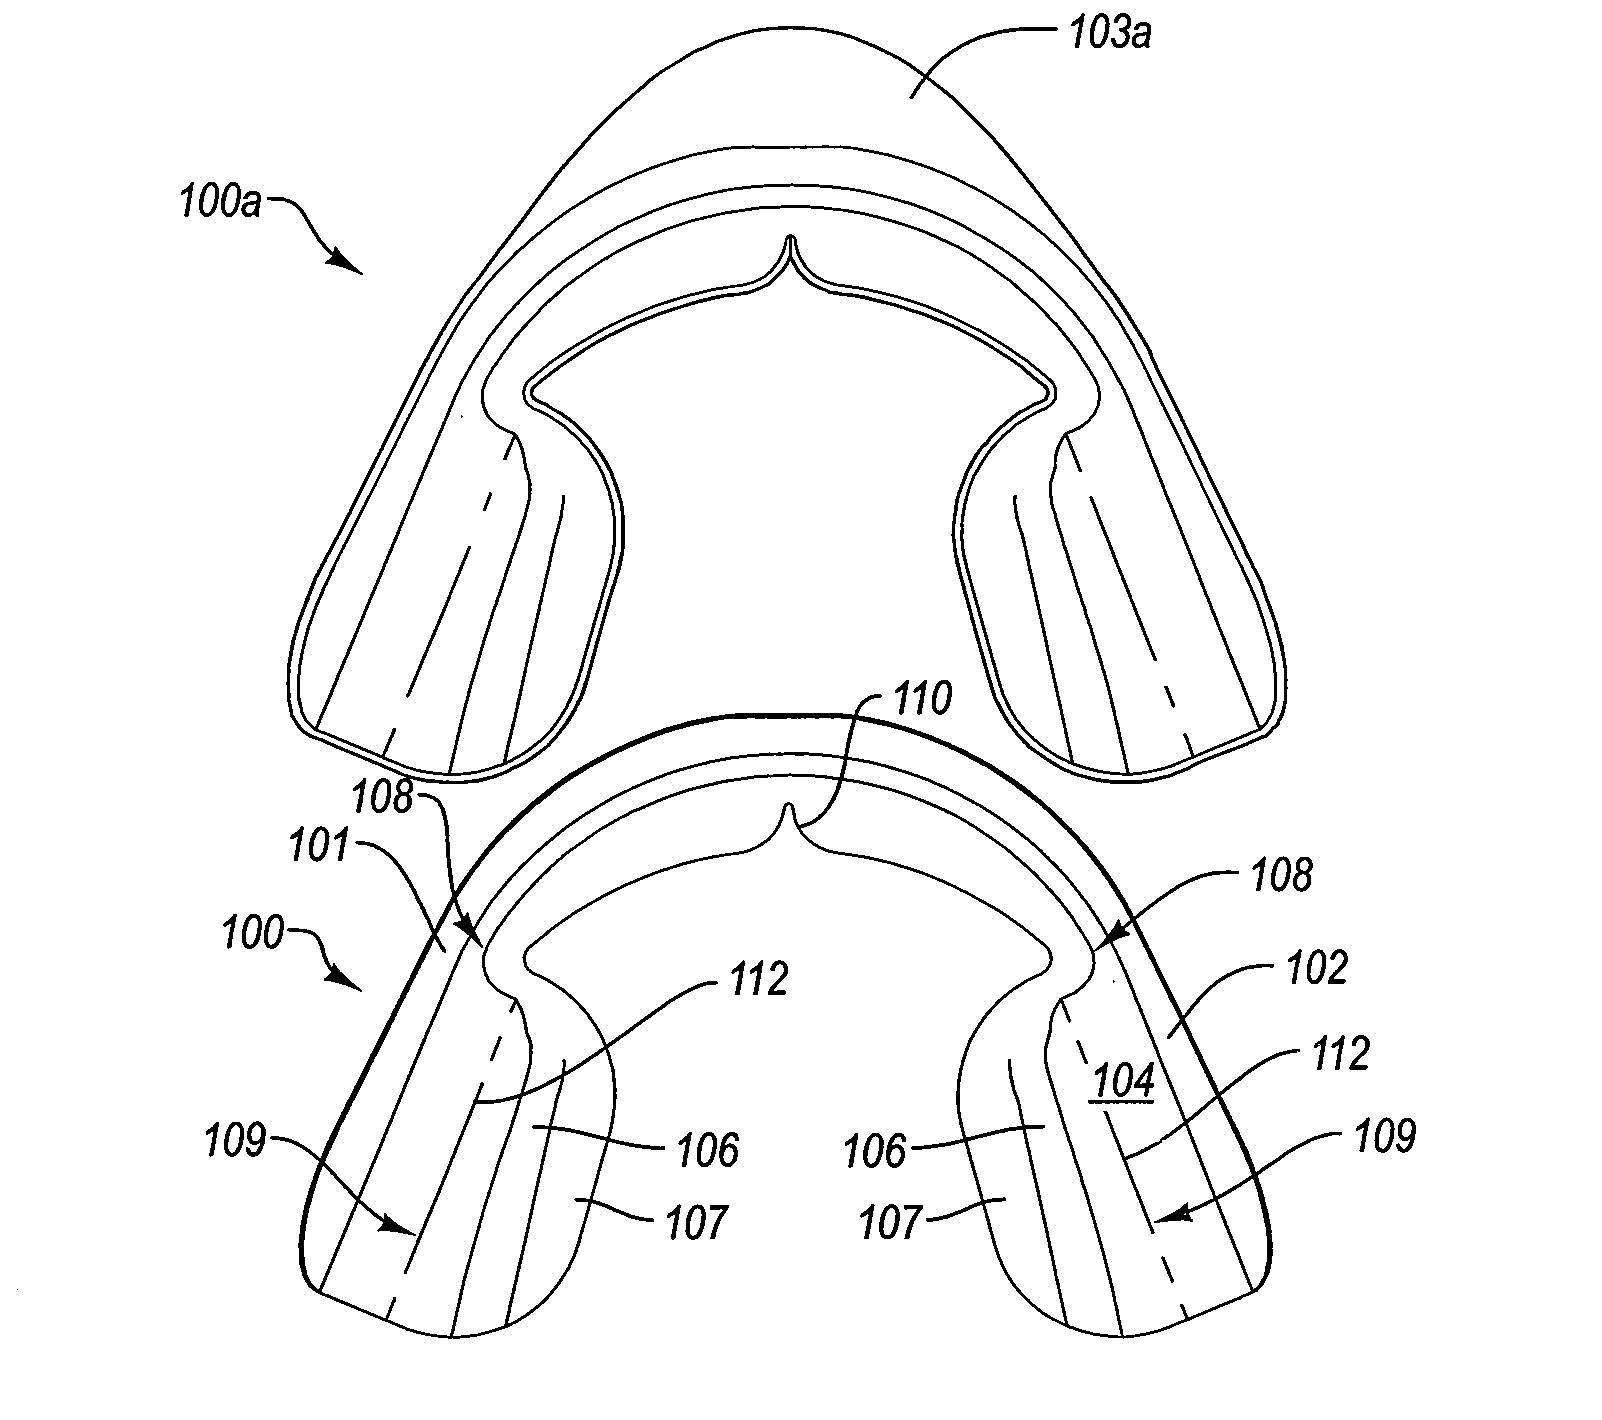 Non-custom dental treatment trays and mouth guards having improved anatomical features